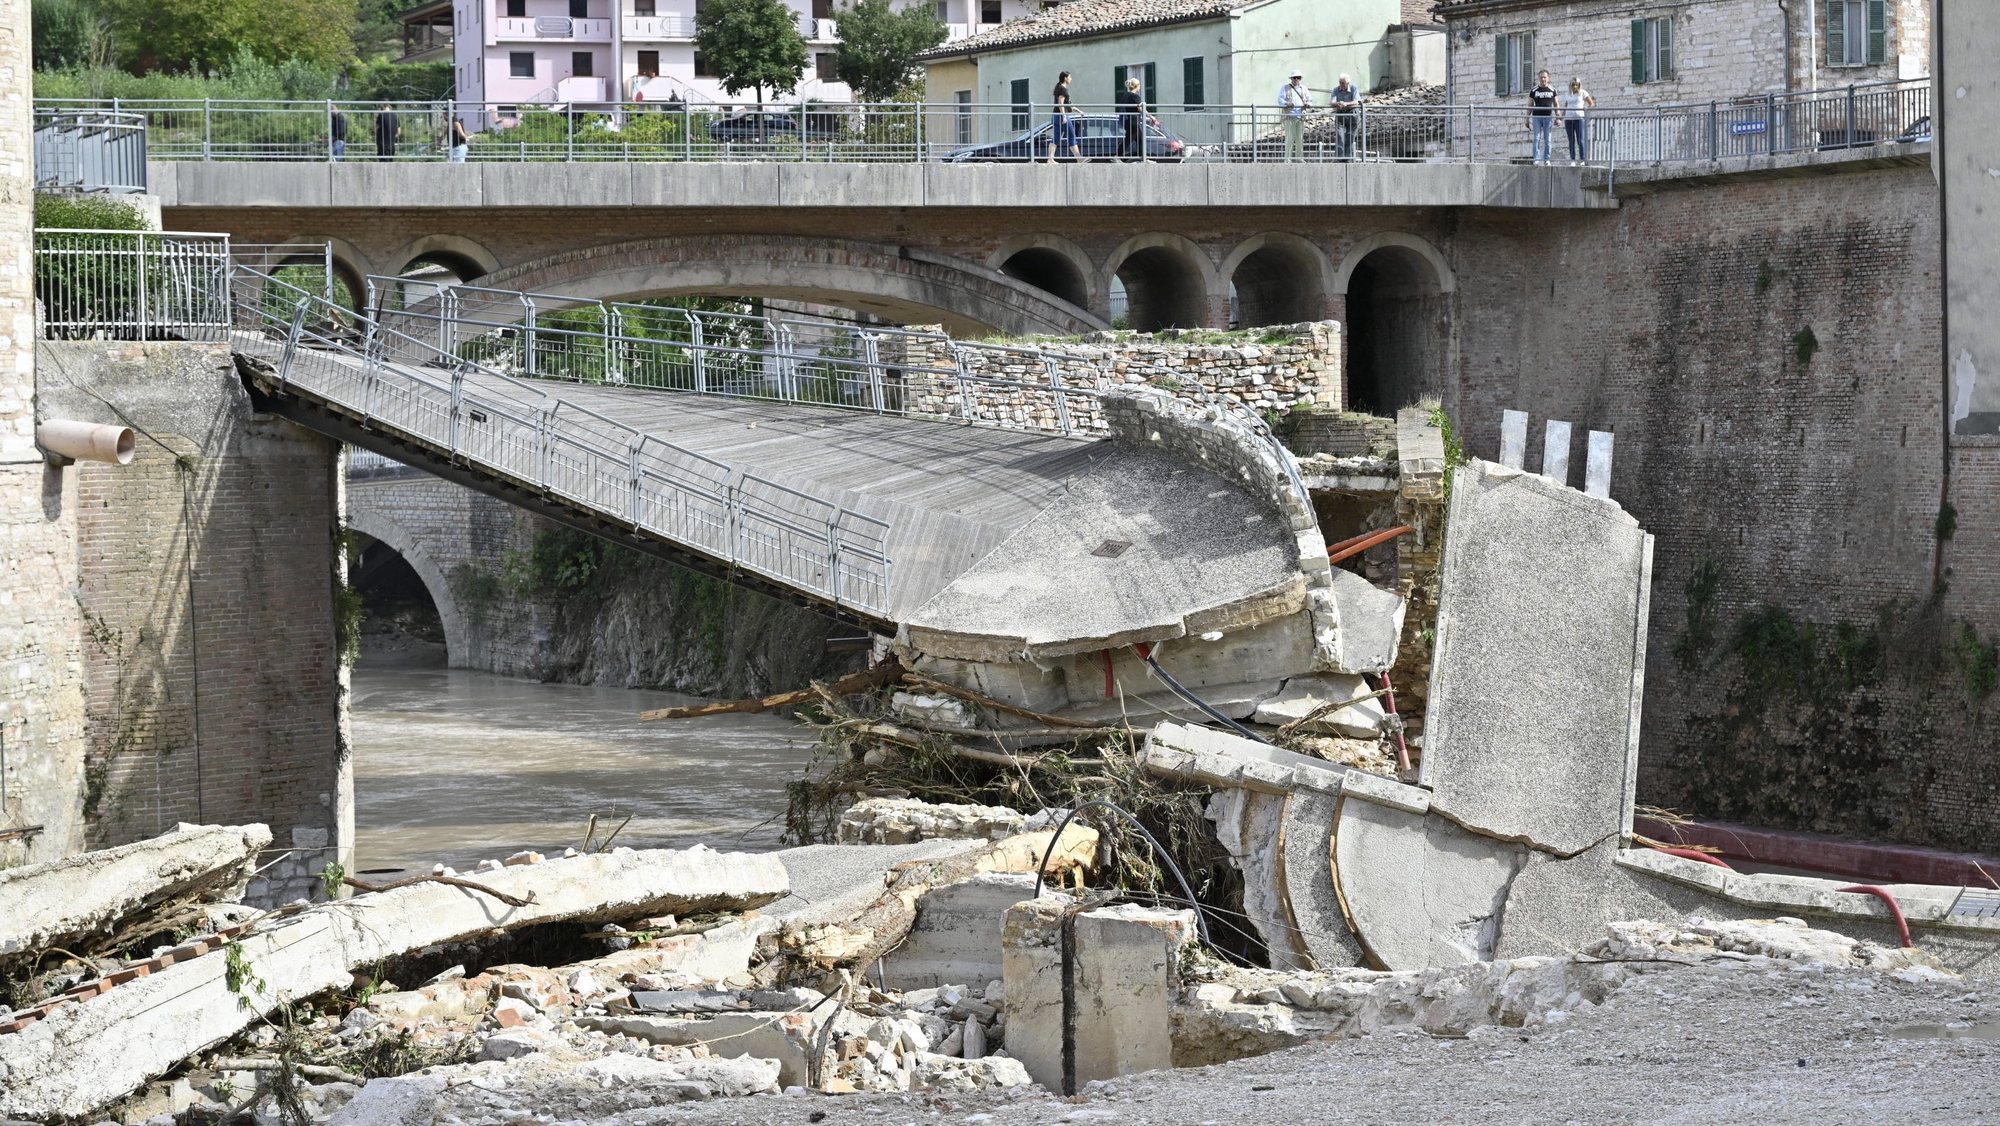 epa10188286 A collapsed pedestrian bridge in the aftermath of flash floods caused by the Sanguerone River due to an overnight rain bomb in Sassoferrato, Ancona province, central Italy, 16 September 2022. At least 10 people died following flash floods due to rain bombs and heavy winds in the province of Ancona.  EPA/ALESSANDRO DI MEO